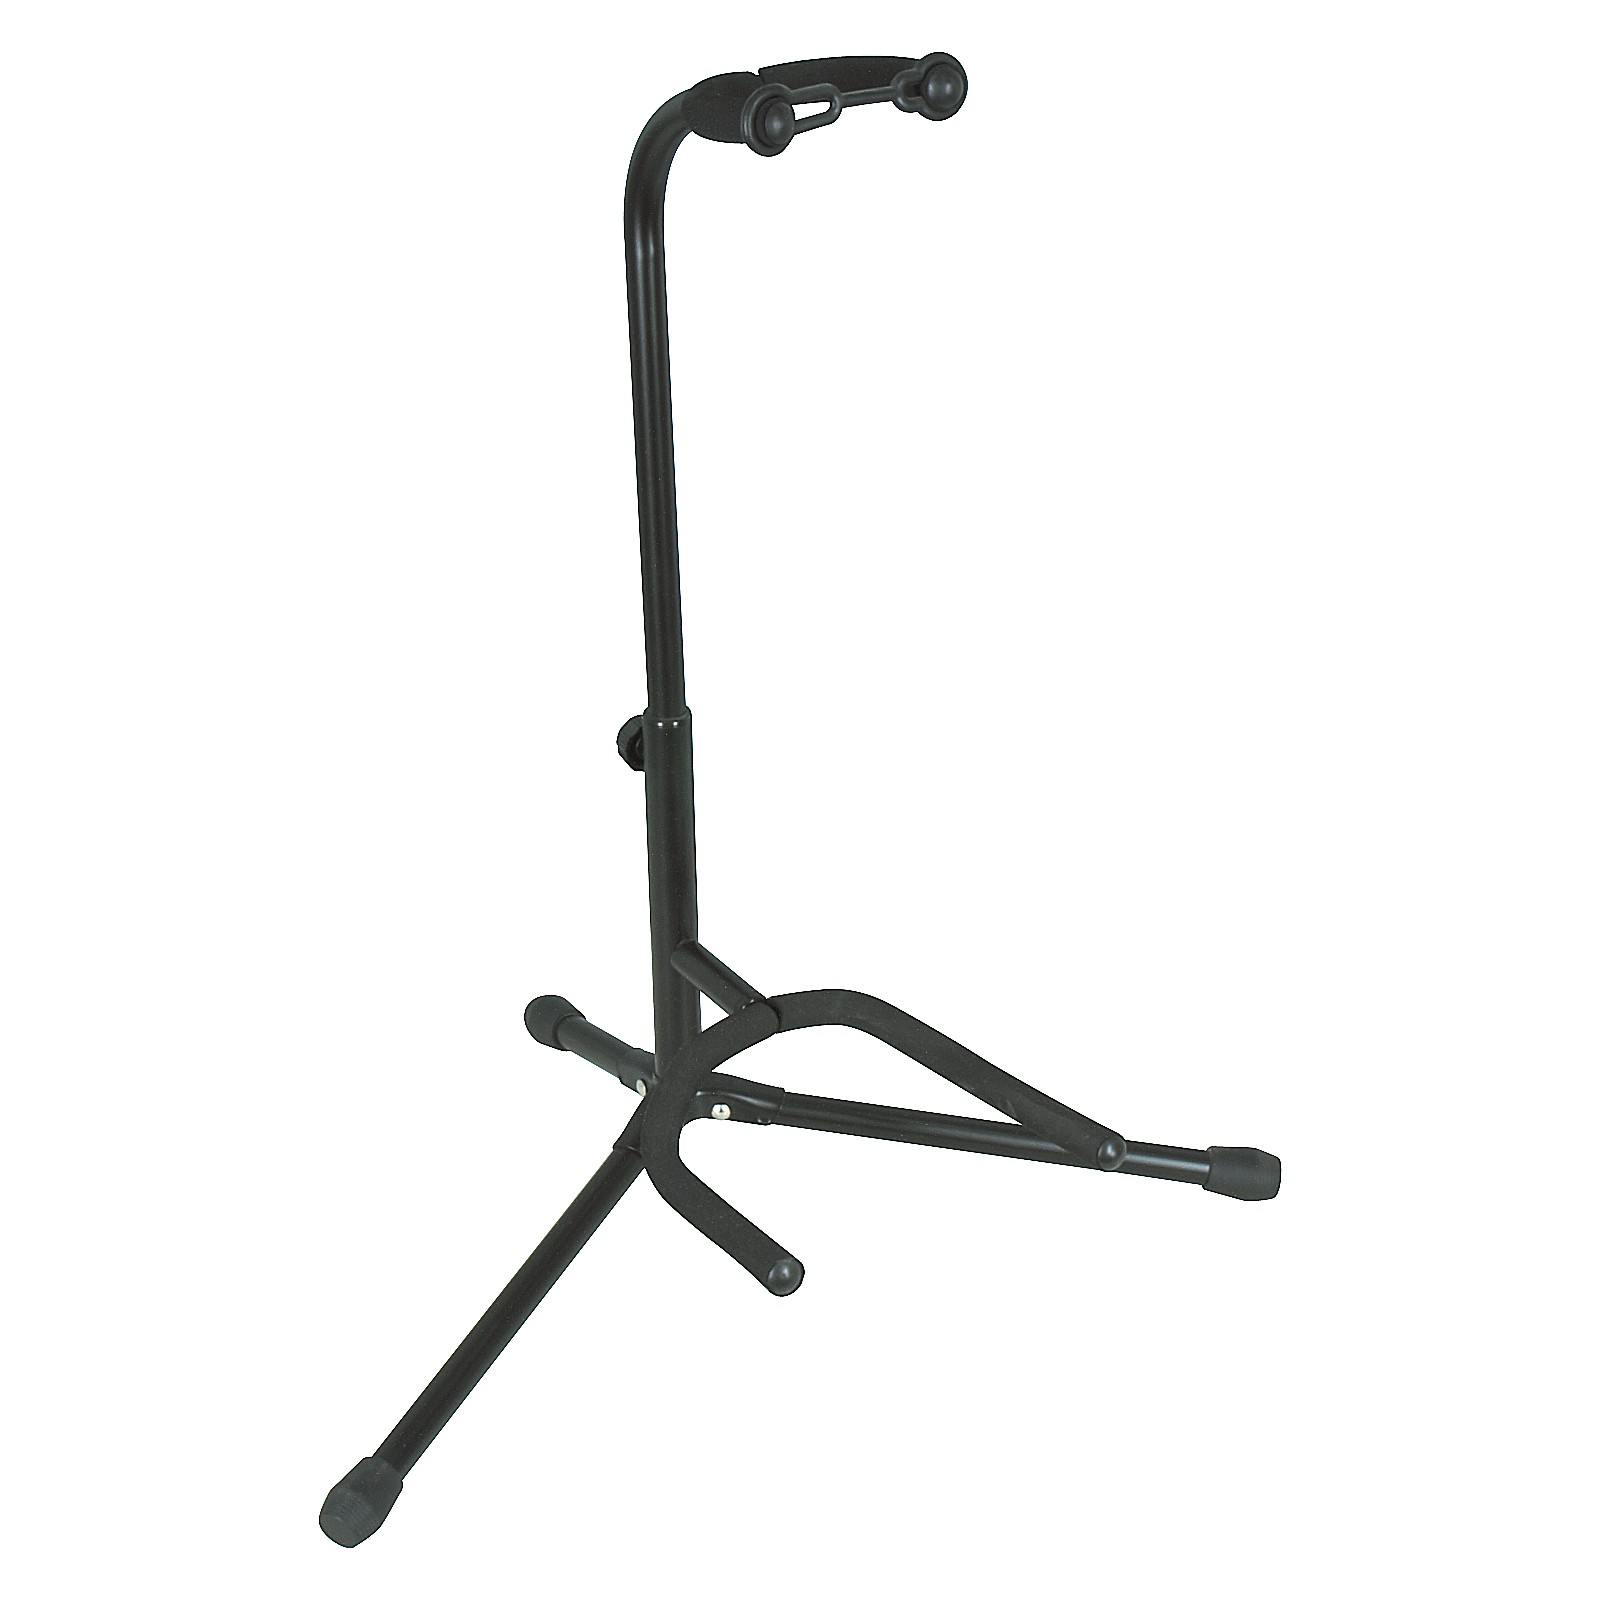 Guitar　Musician's　Gear　and　Electric,　Acoustic　Bass　Black　Guitar　Stand　Center